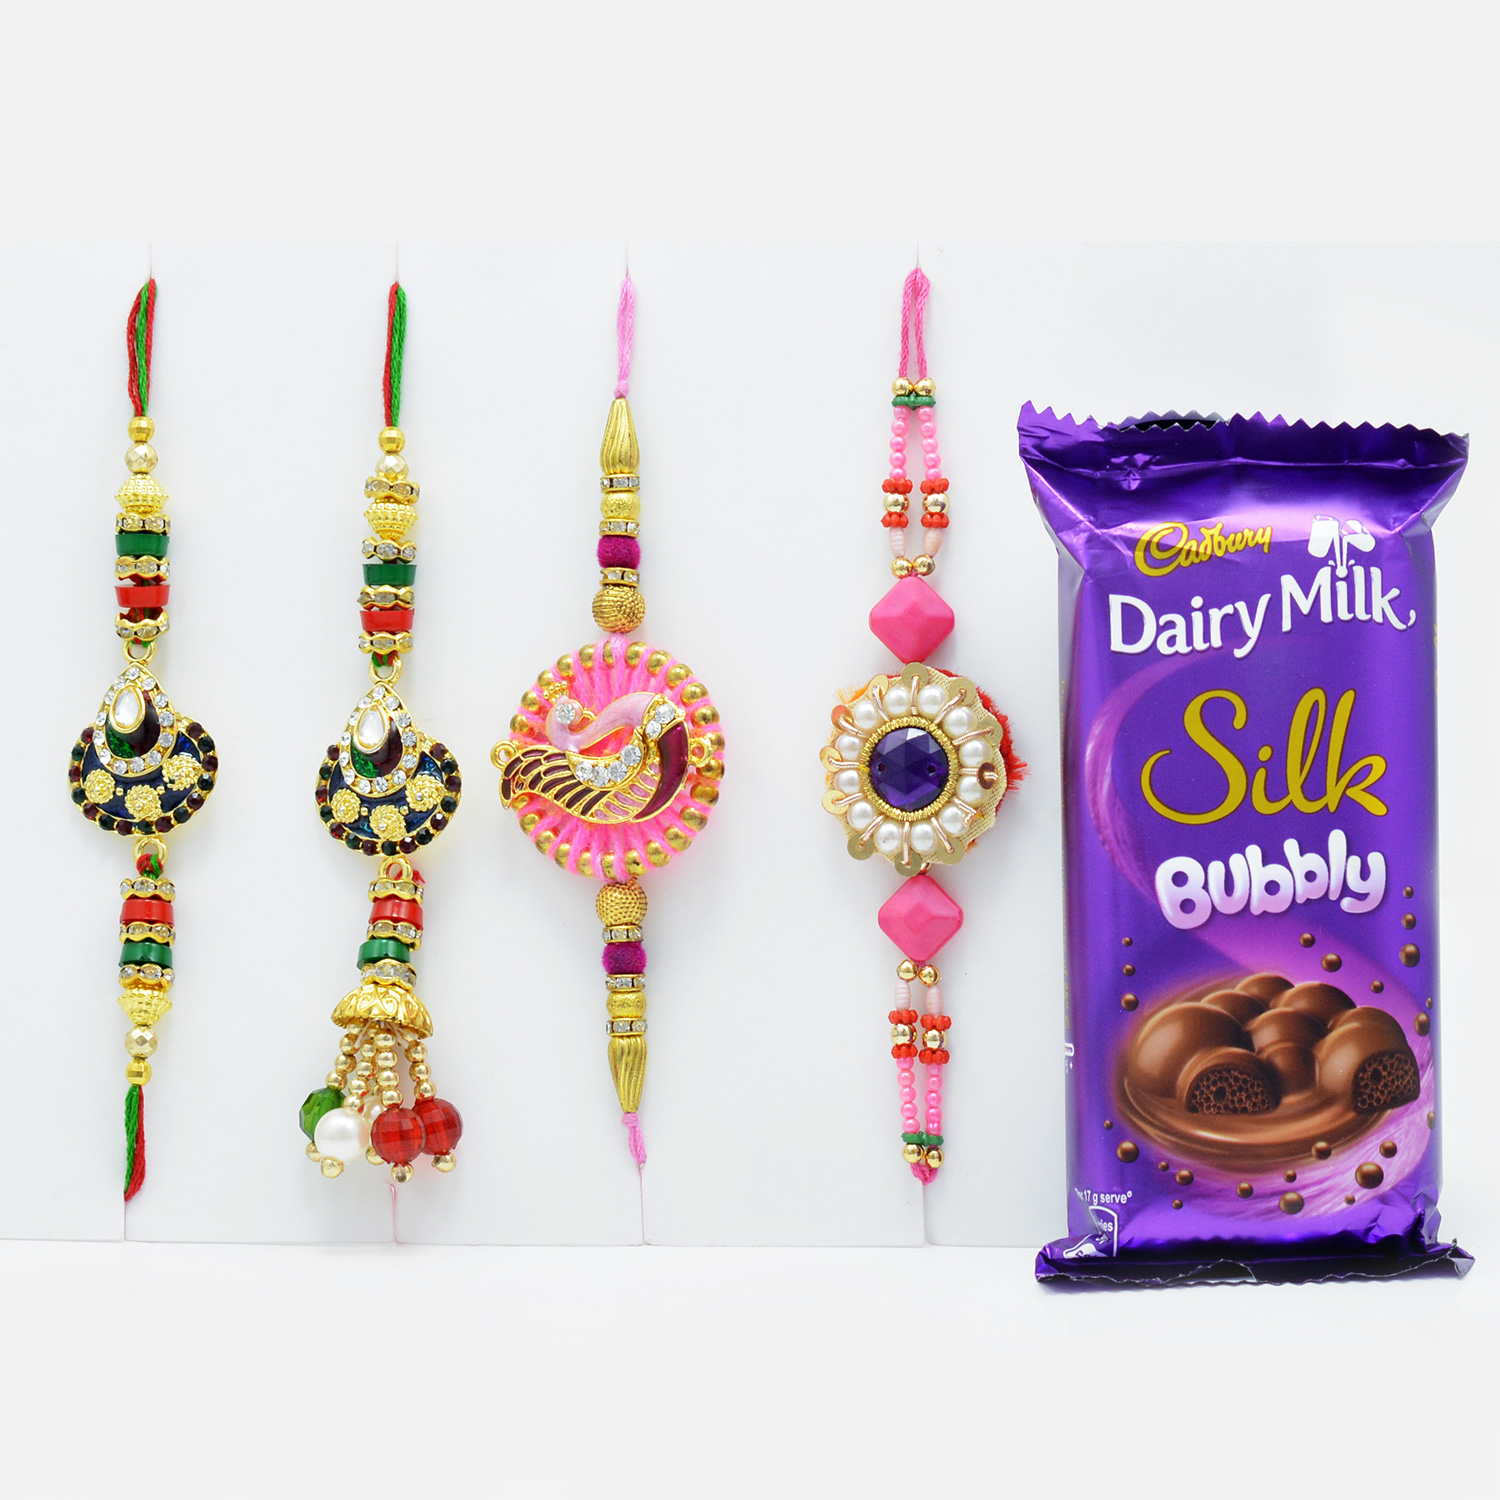 Colourful Rakhi Set of 4 with Mouth-Watering Cadbury Dairy Milk Silk Bubbly